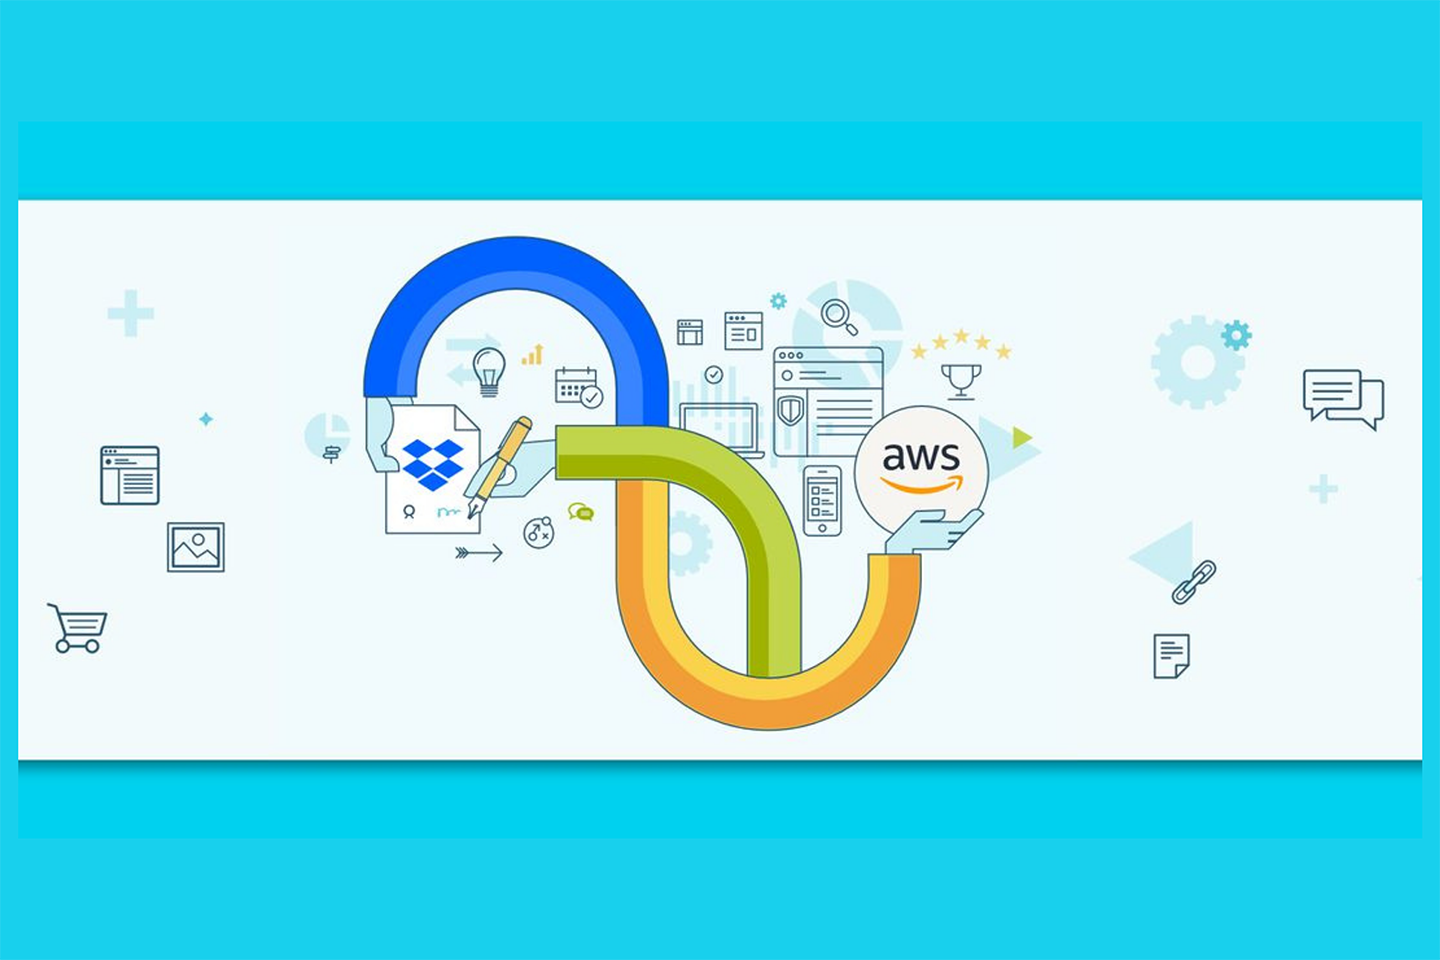 Illustration of arms and hands connecting the AWS logo and the Dropbox logo